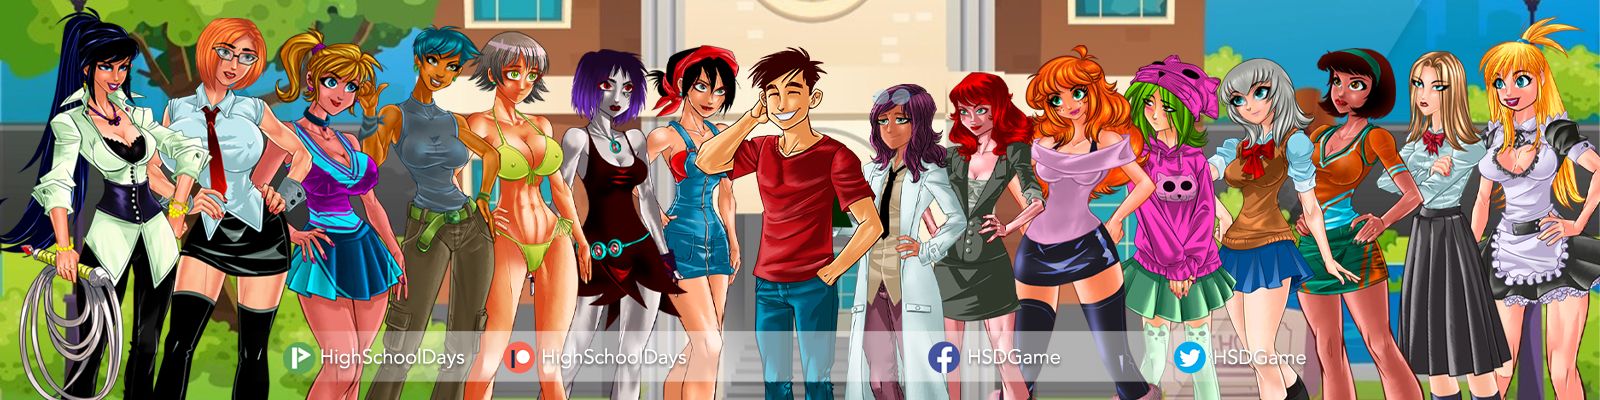 High School Days Adult Game Download